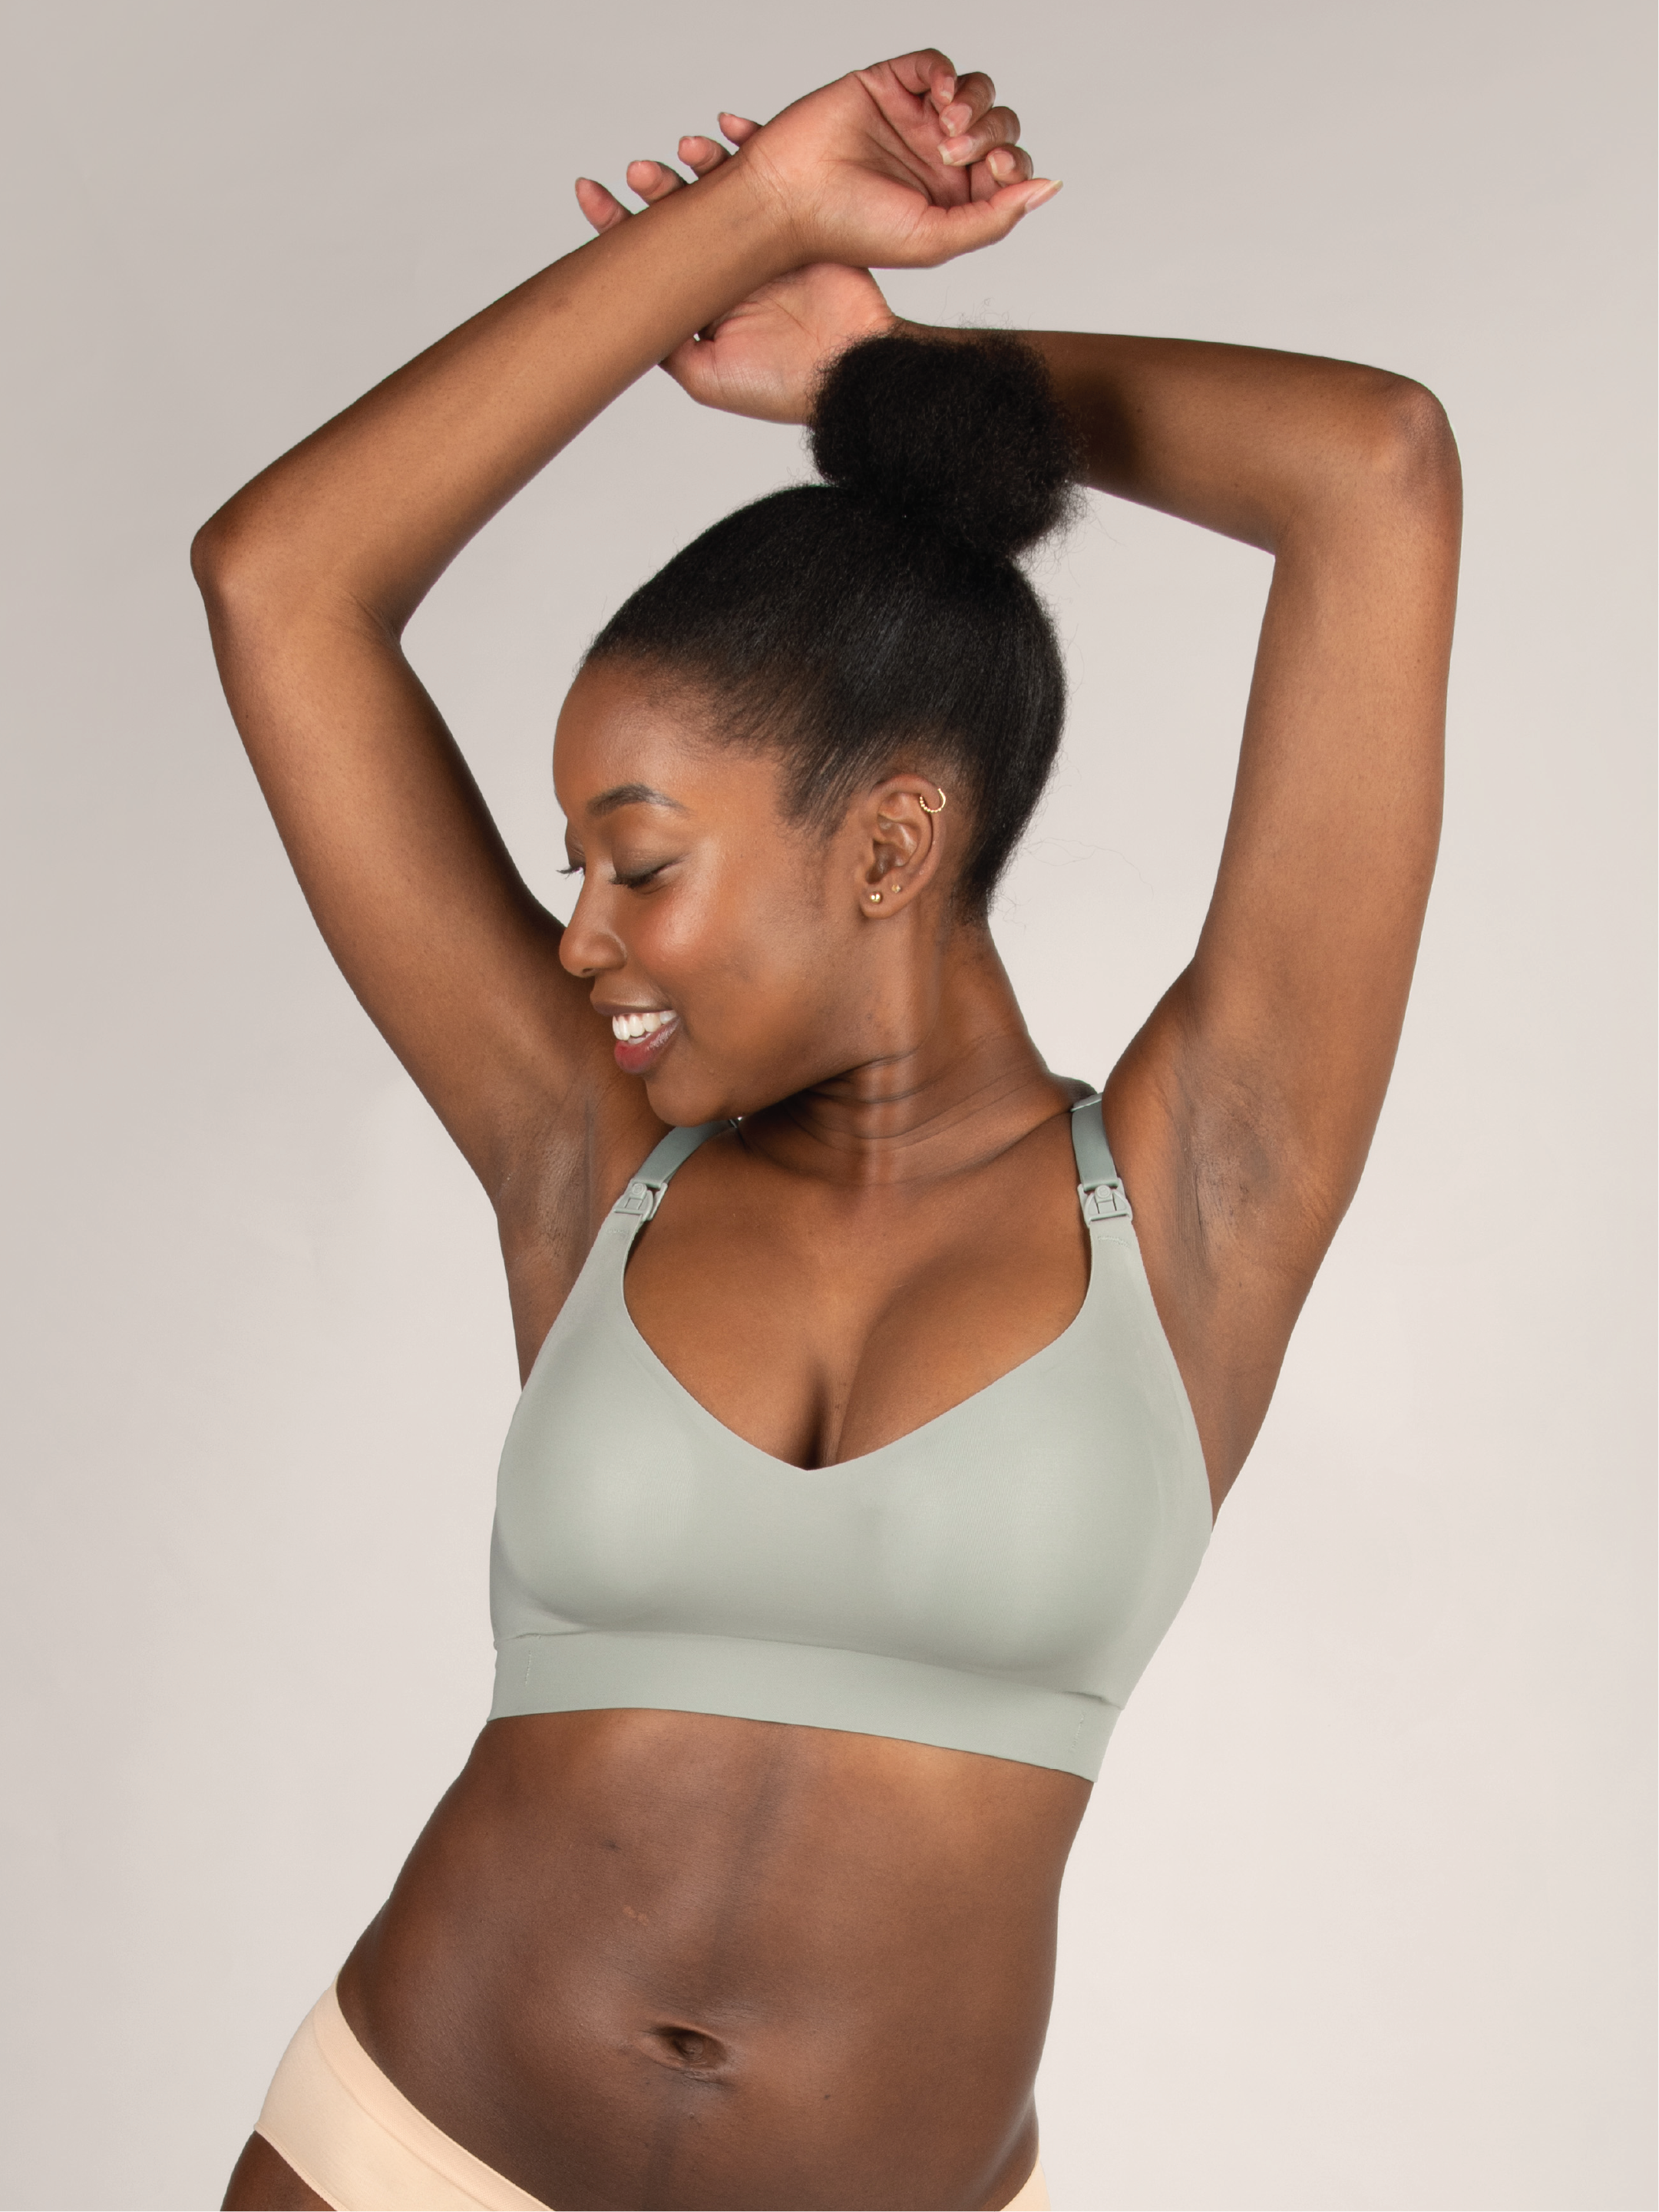 It looks like a basic, essential, natural fit Nursing Bra, but